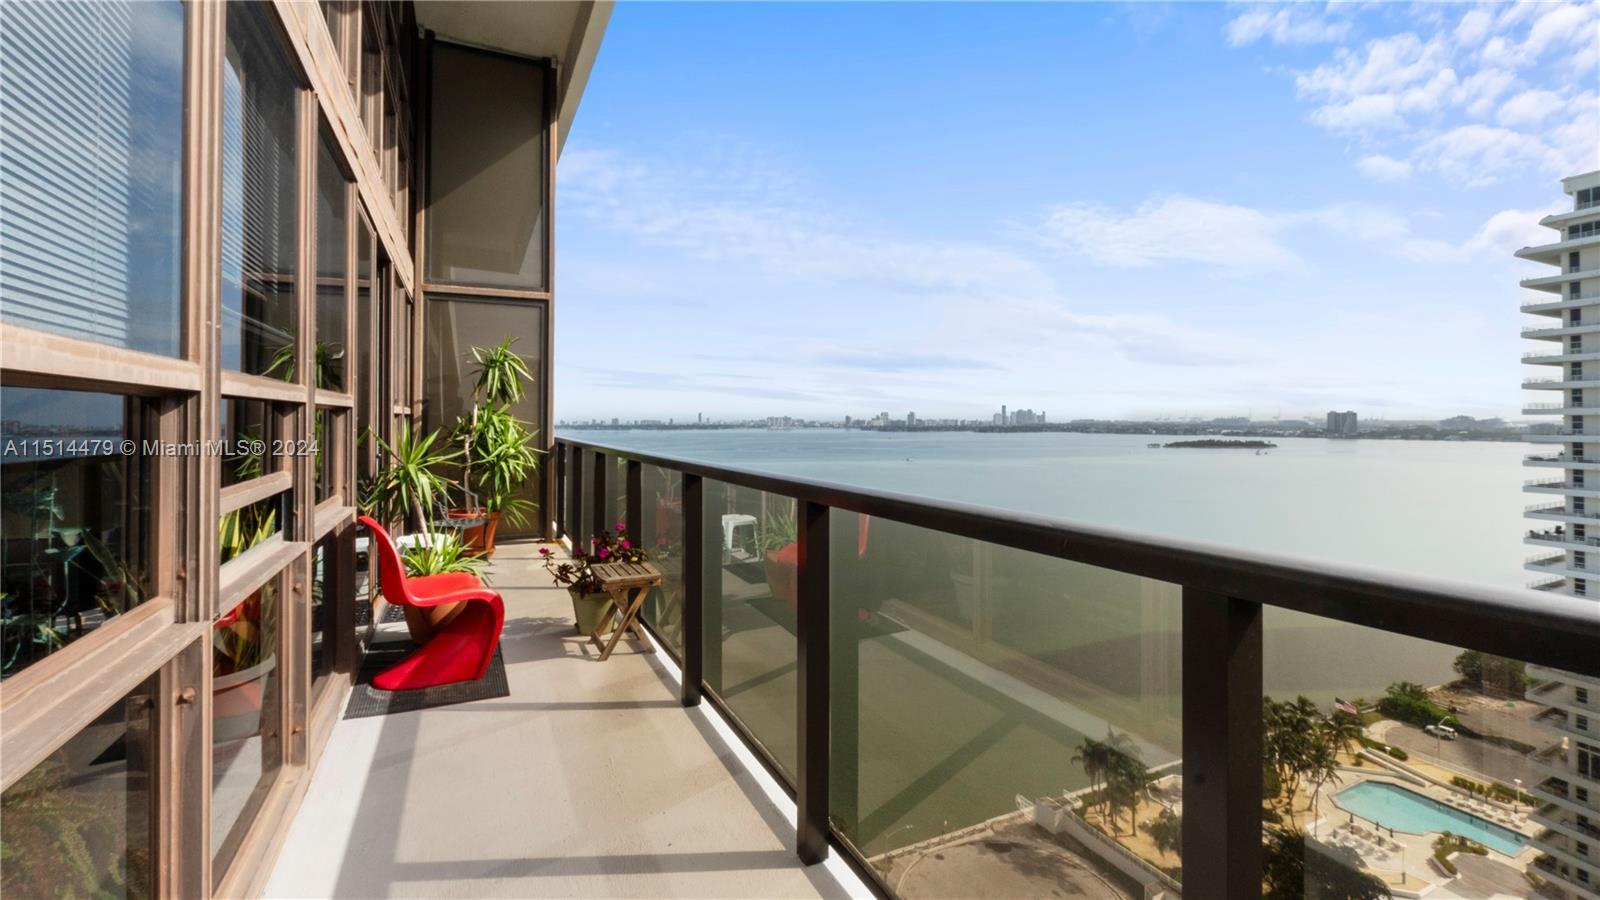 Stunning 2-story penthouse unit with breathtaking bay and city views! This luxurious 2 spacious bedr